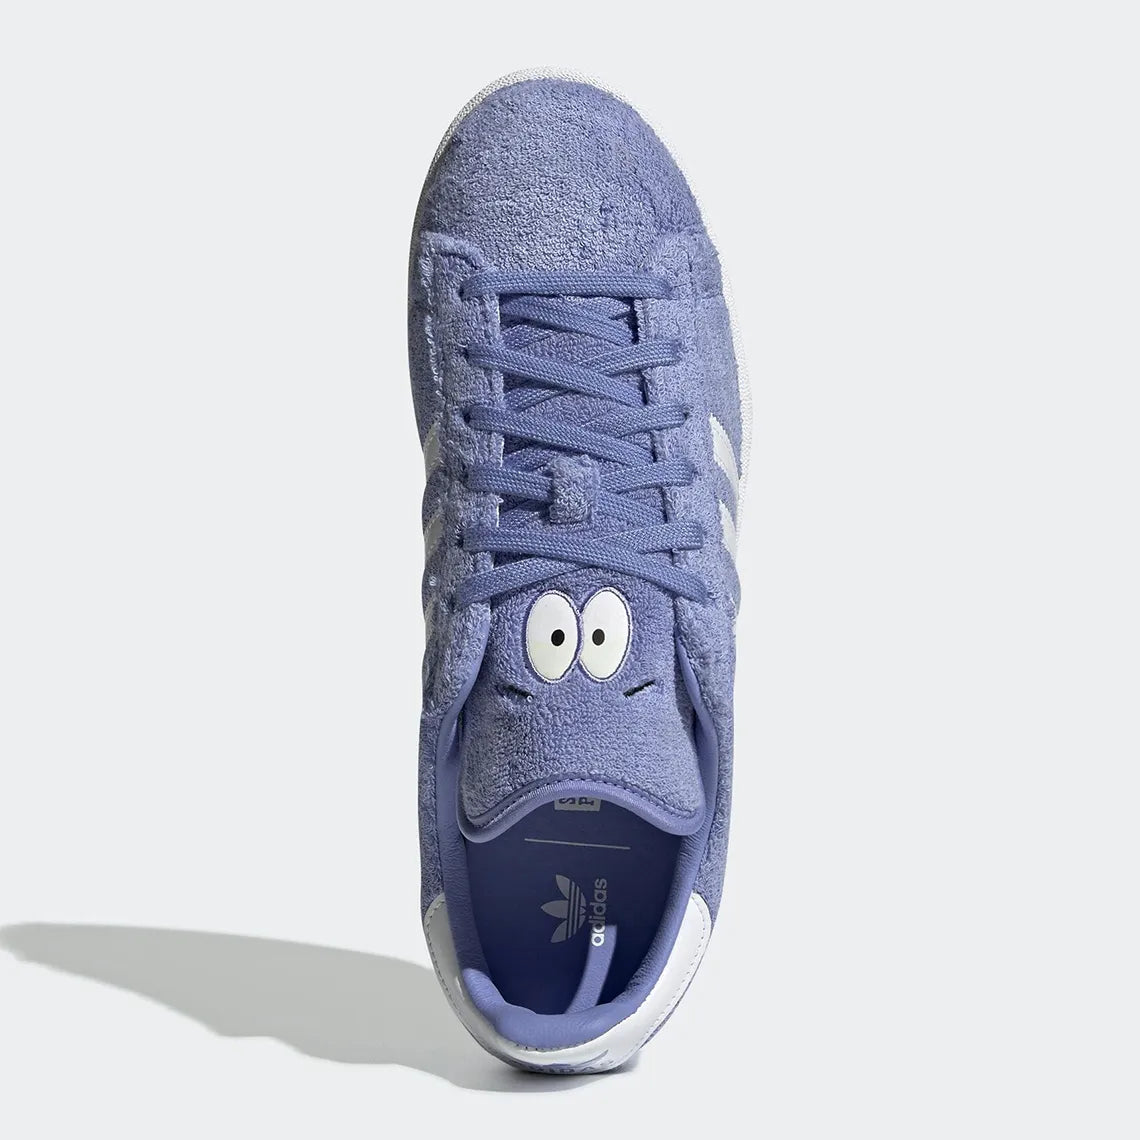 South Park x Adidas Campus 80s "Towelie" | GZ9177 | $299.99 | $299.99 | $299.99 | Shoes | Marching Dogs